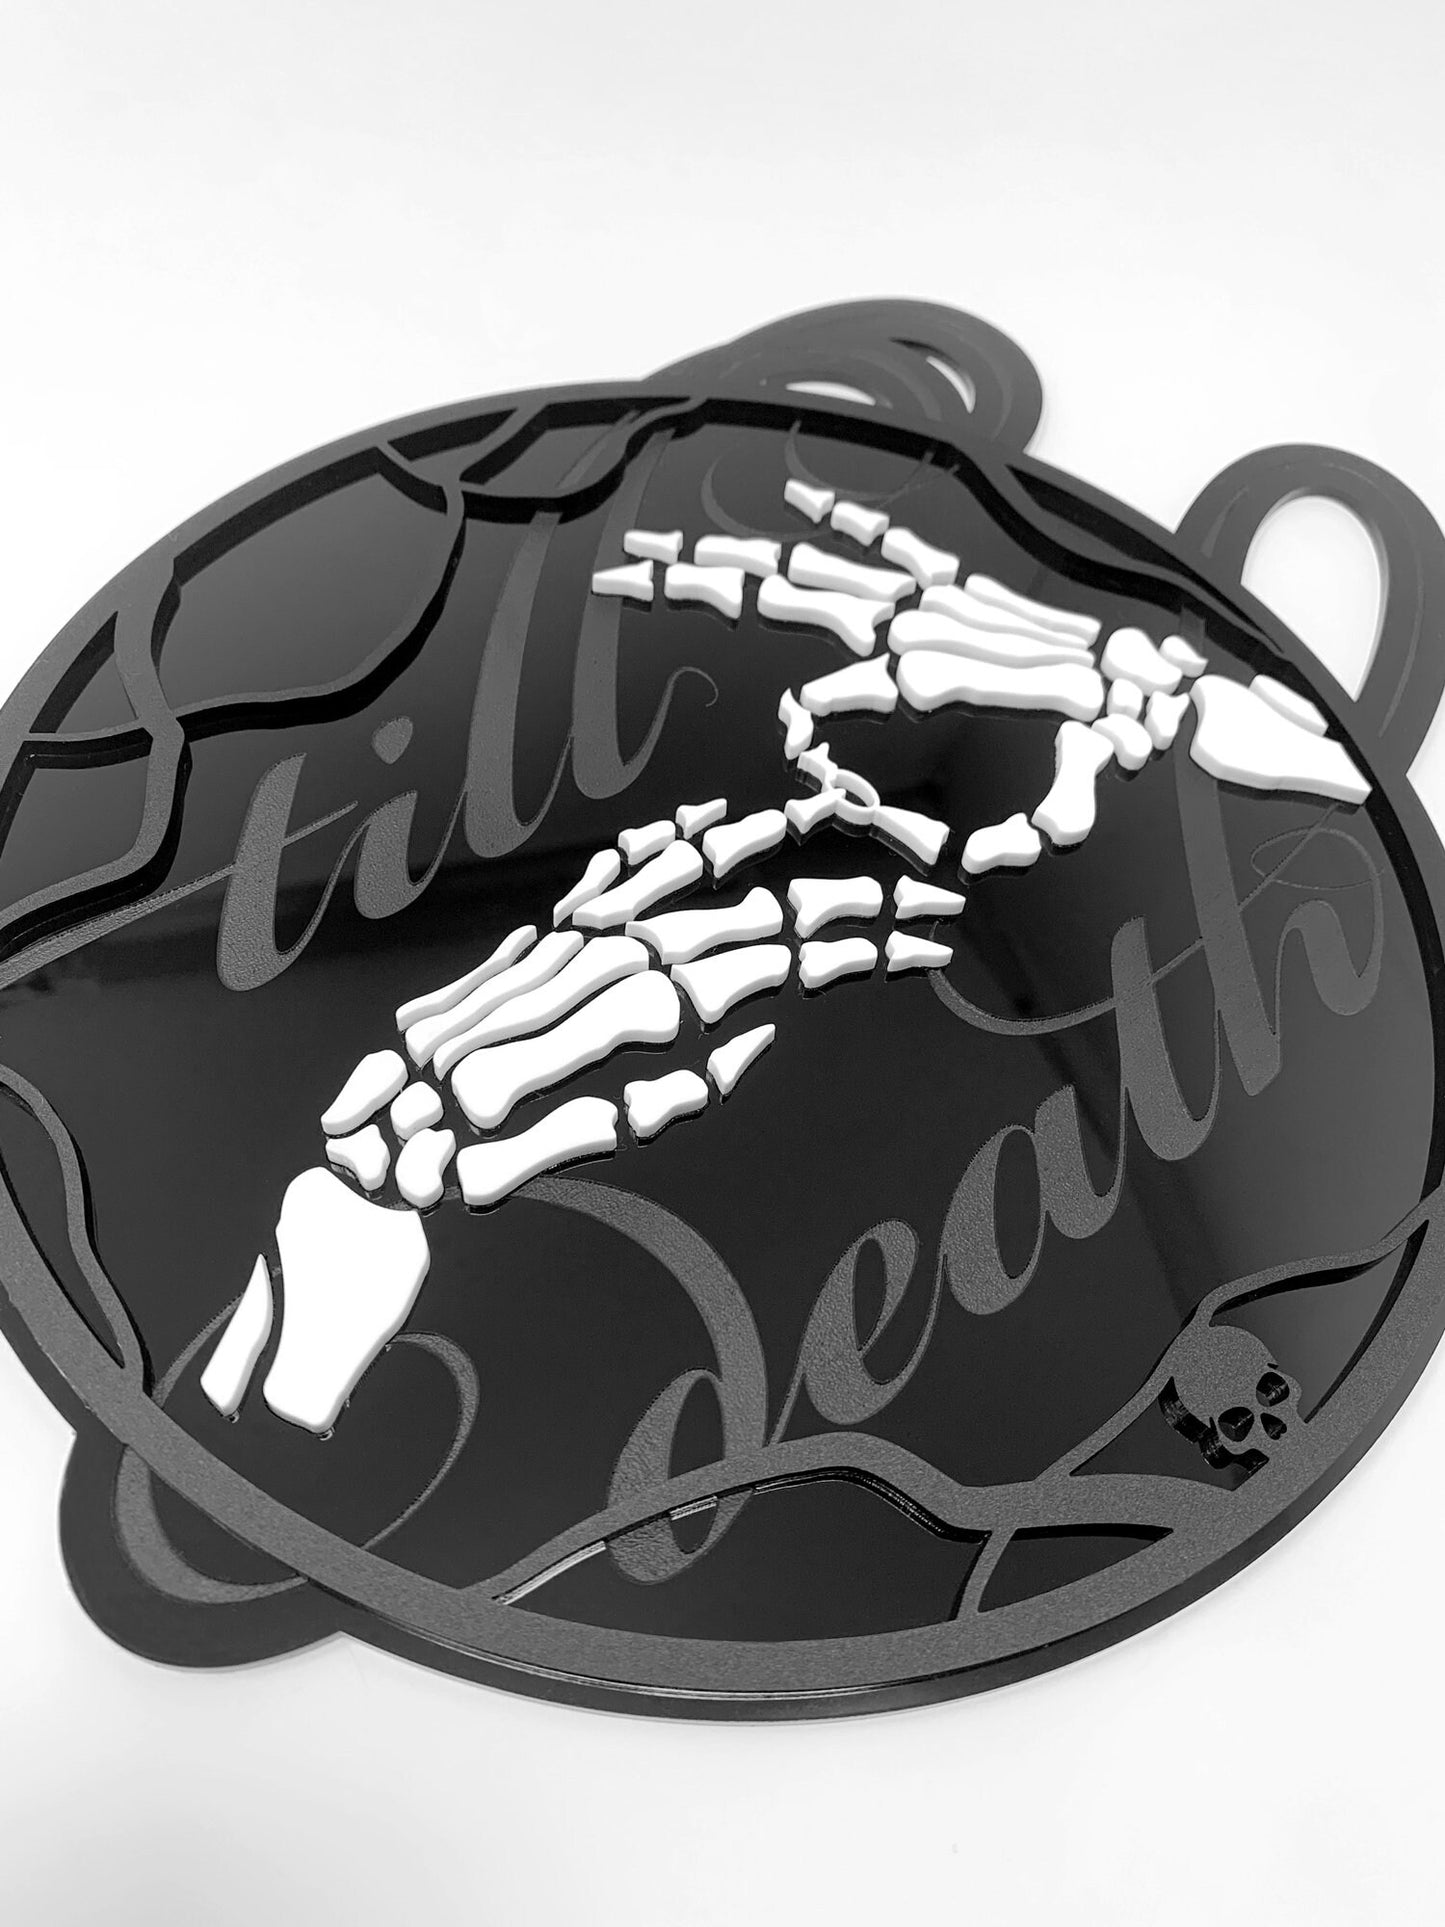 Till Death Love Skeleton Gothic Home Decor Acrylic Sign with Engraving